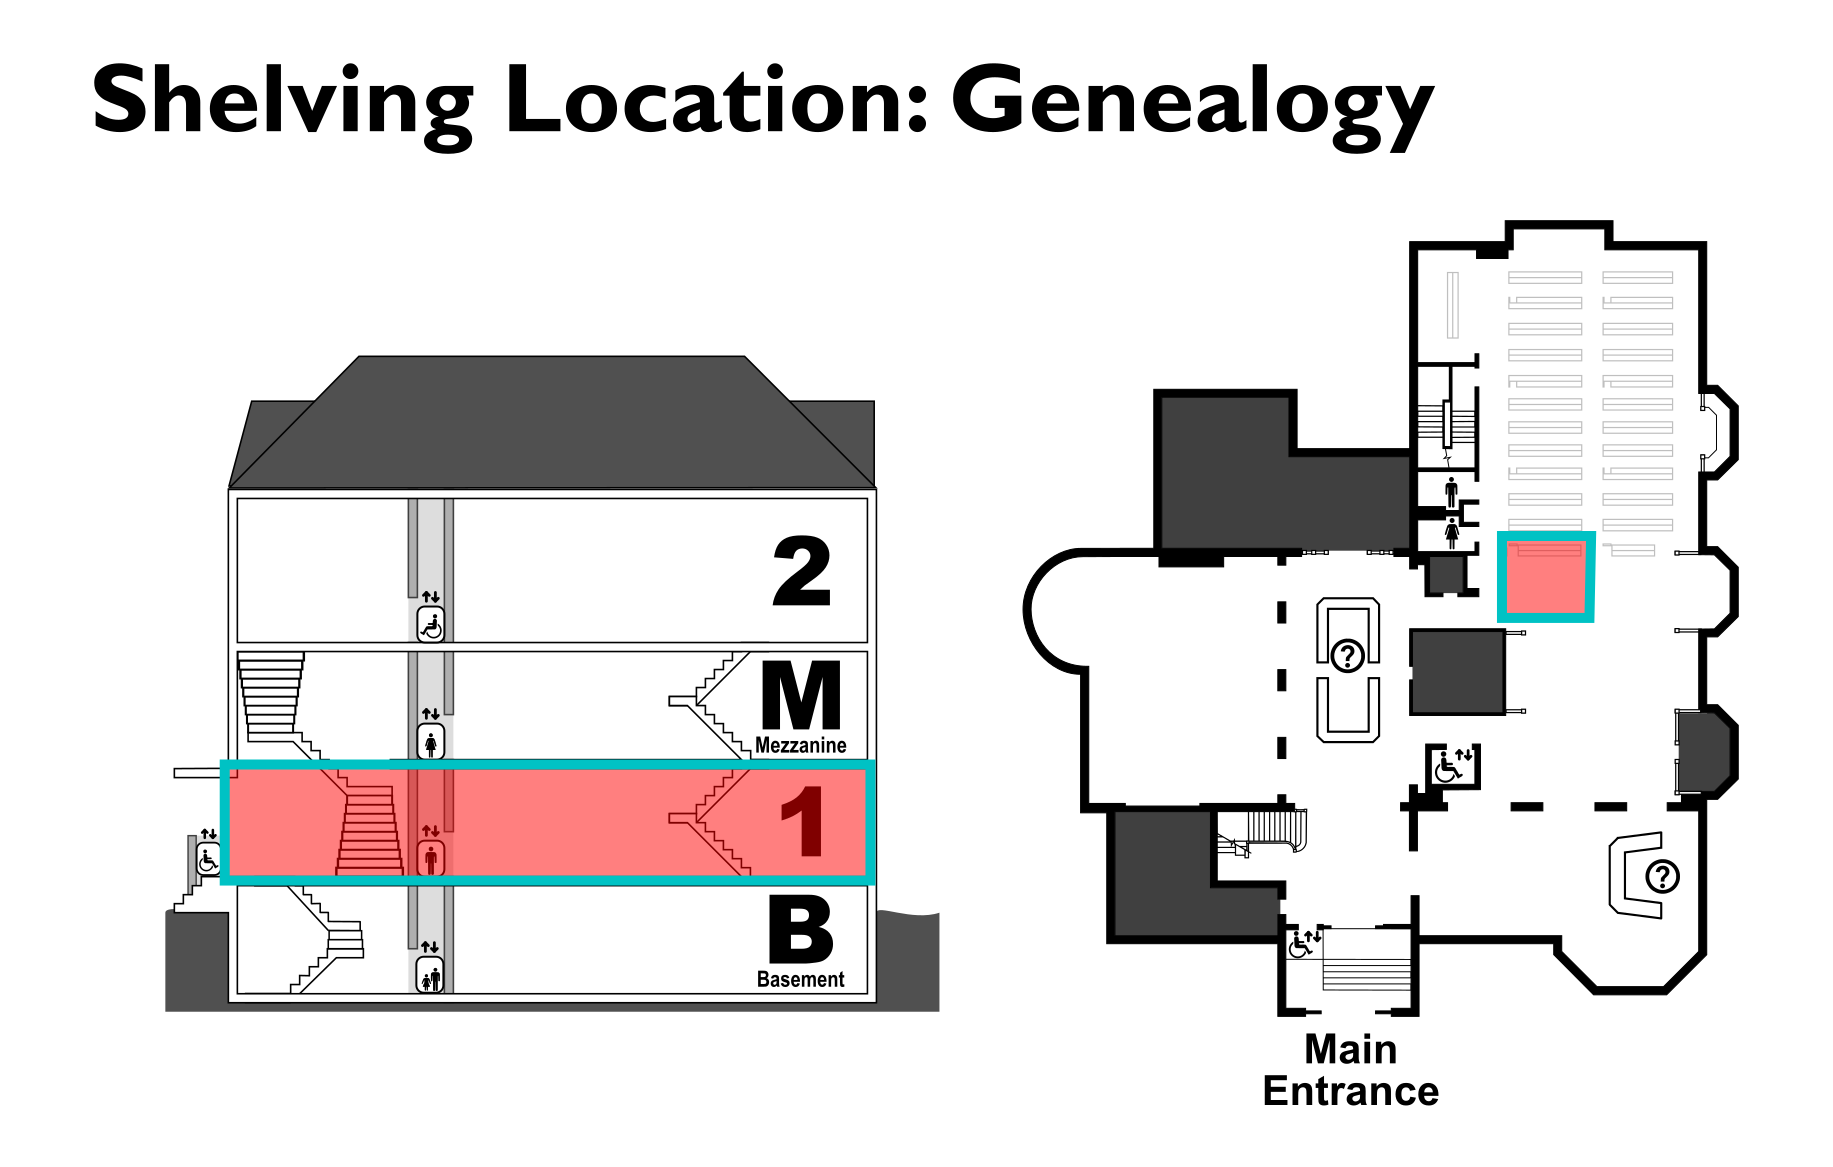 map showing location of the Genealogy shelving area